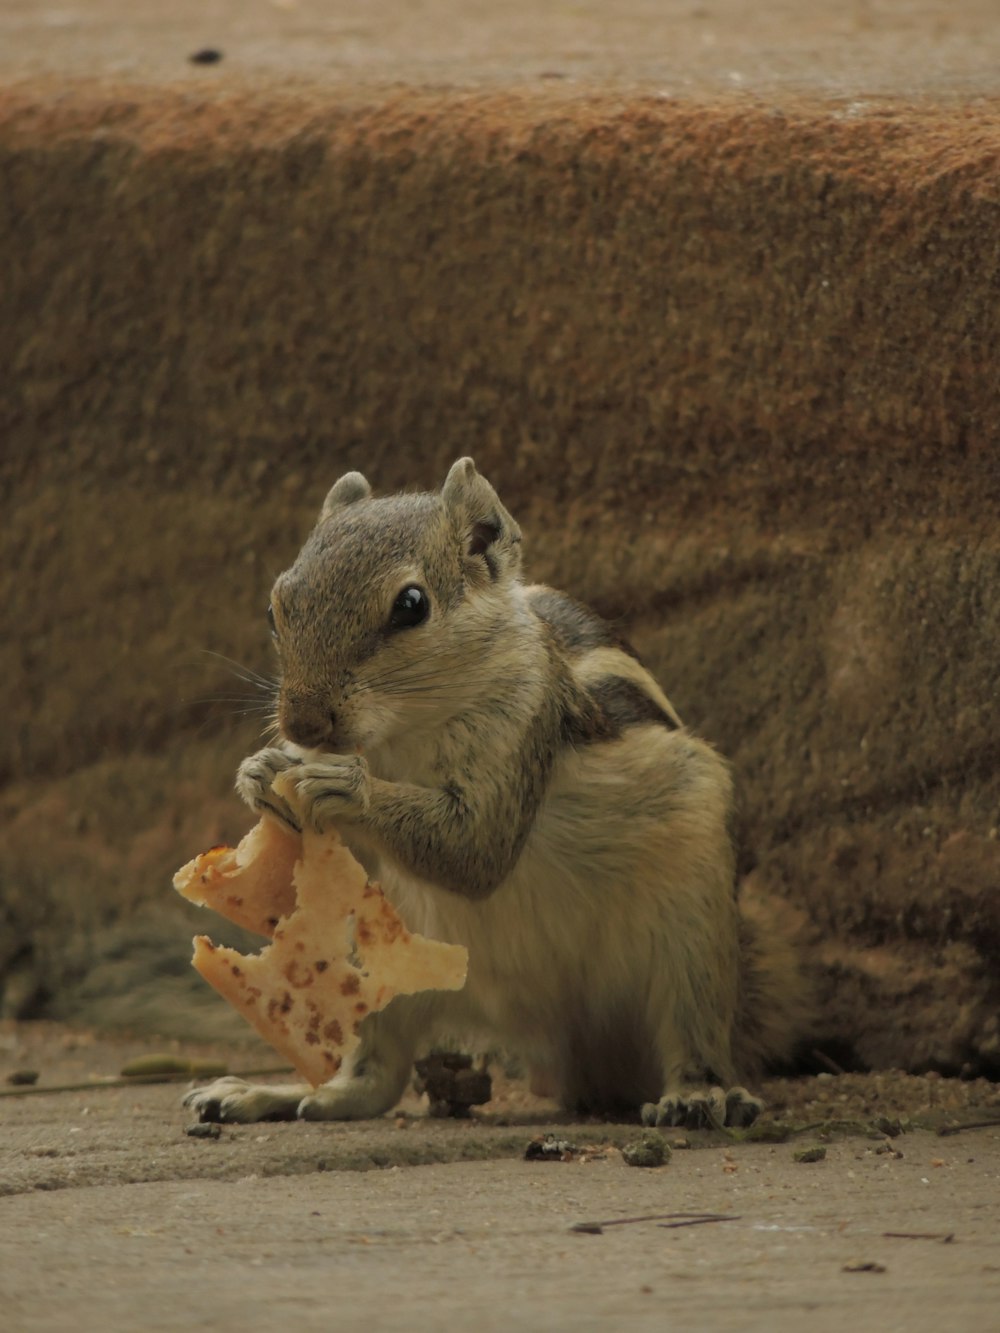 a squirrel is holding a piece of food